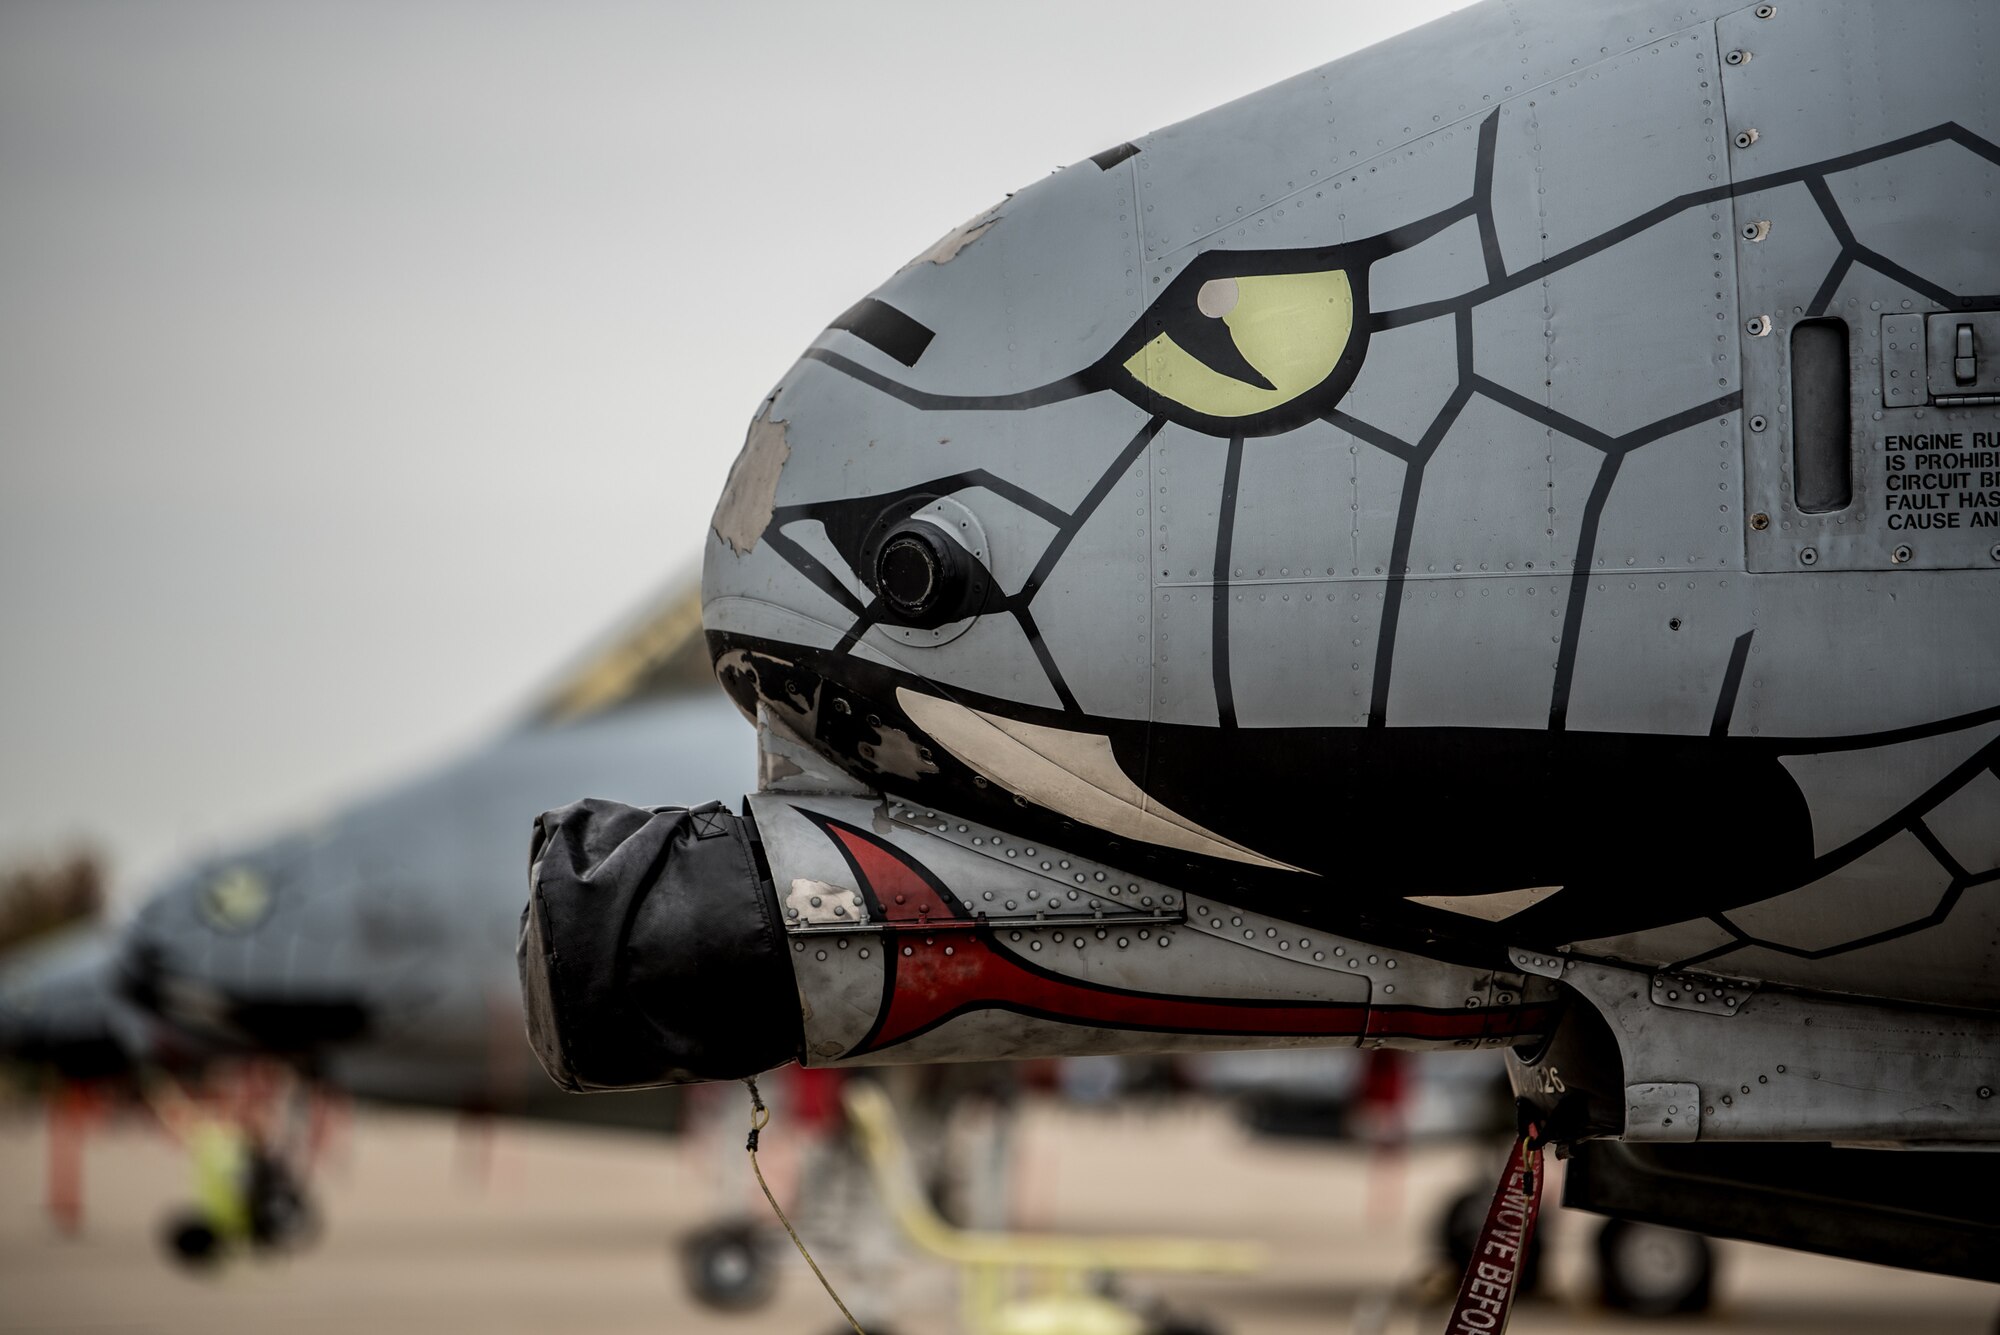 Nose art on an Indiana Air National Guard A-10 Thunderbolt II, shown here on the flight line of the Kentucky Air National Guard Base in Louisville, Ky., April 13, 2019, reflect’s the aircraft’s use as a close-air combat-support aircraft. The A-10 is one of more than two-dozen military aircraft participating in this year’s Thunder Over Louisville air show. (U.S. Air National Guard photo by Staff Sgt. Joshua Horton)